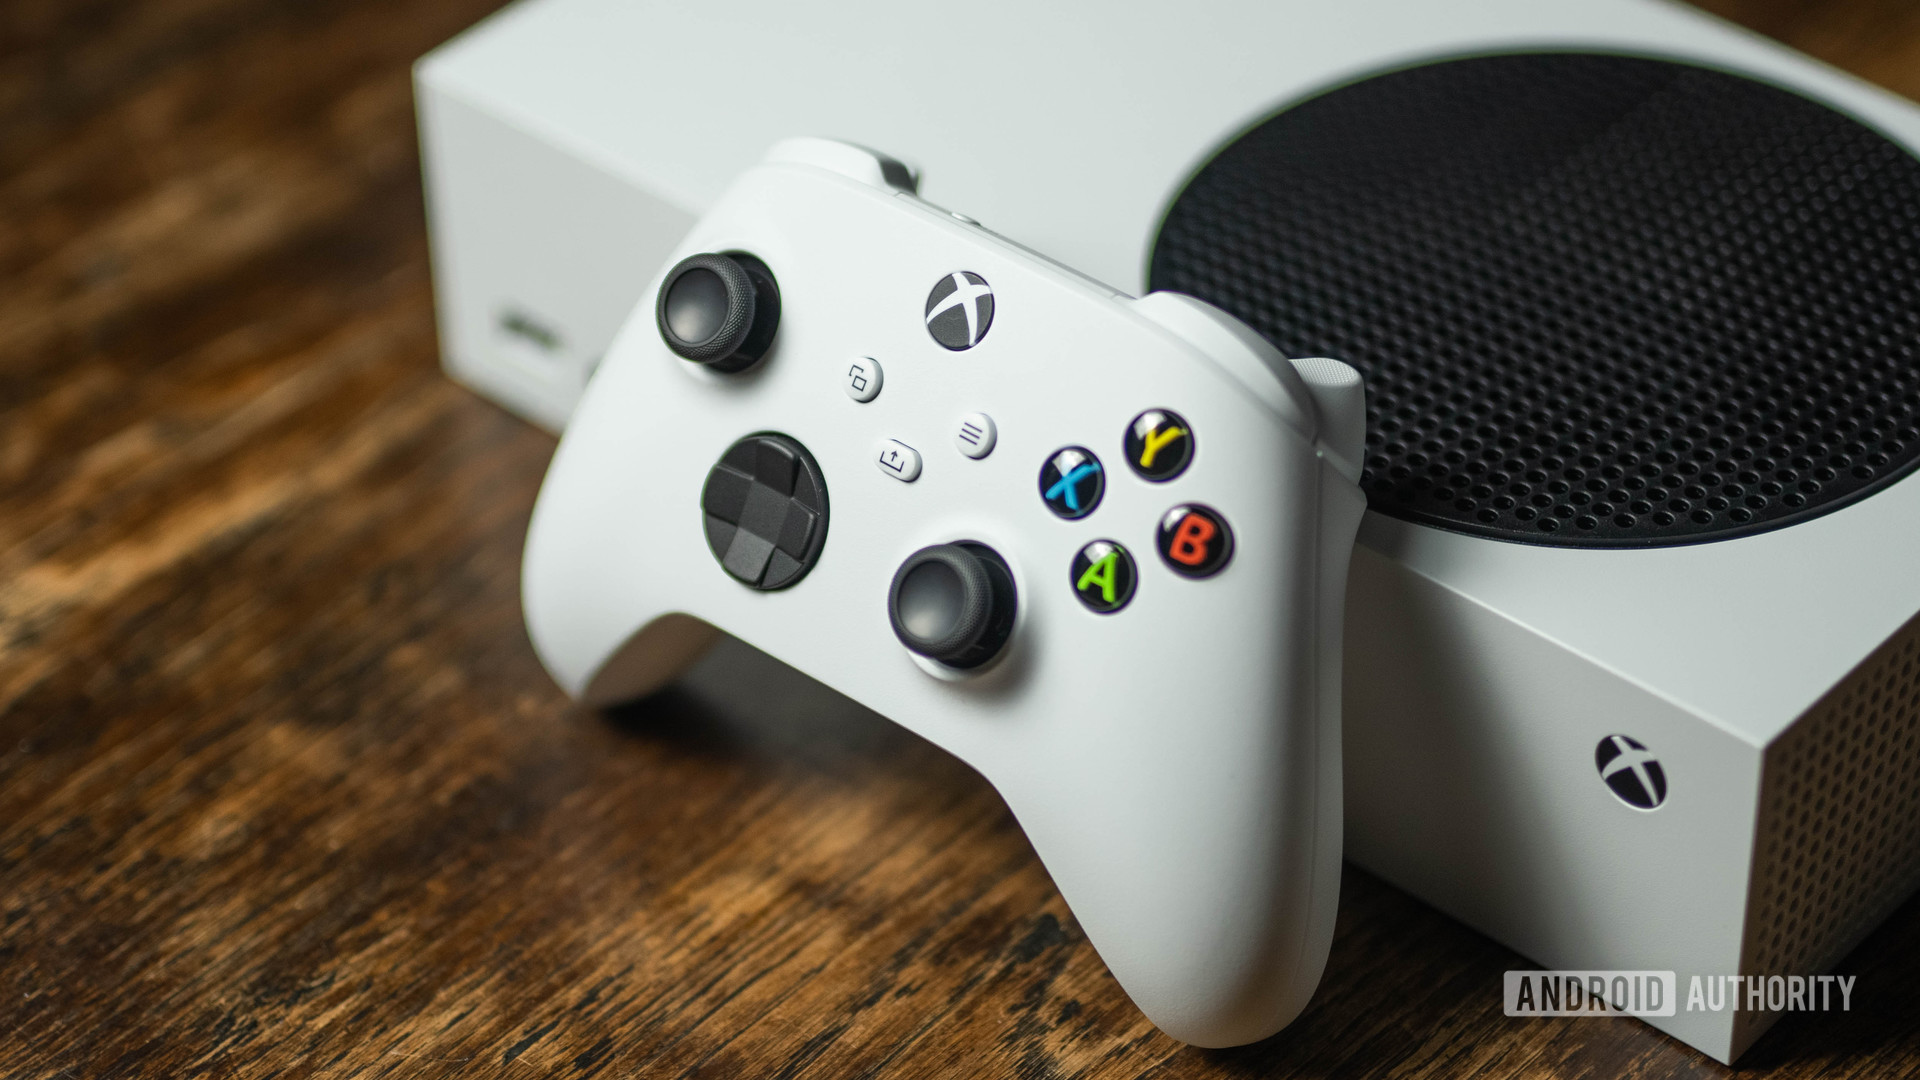 Xbox Pushing Ahead With Plans For Mobile Game Store, Which Isn't